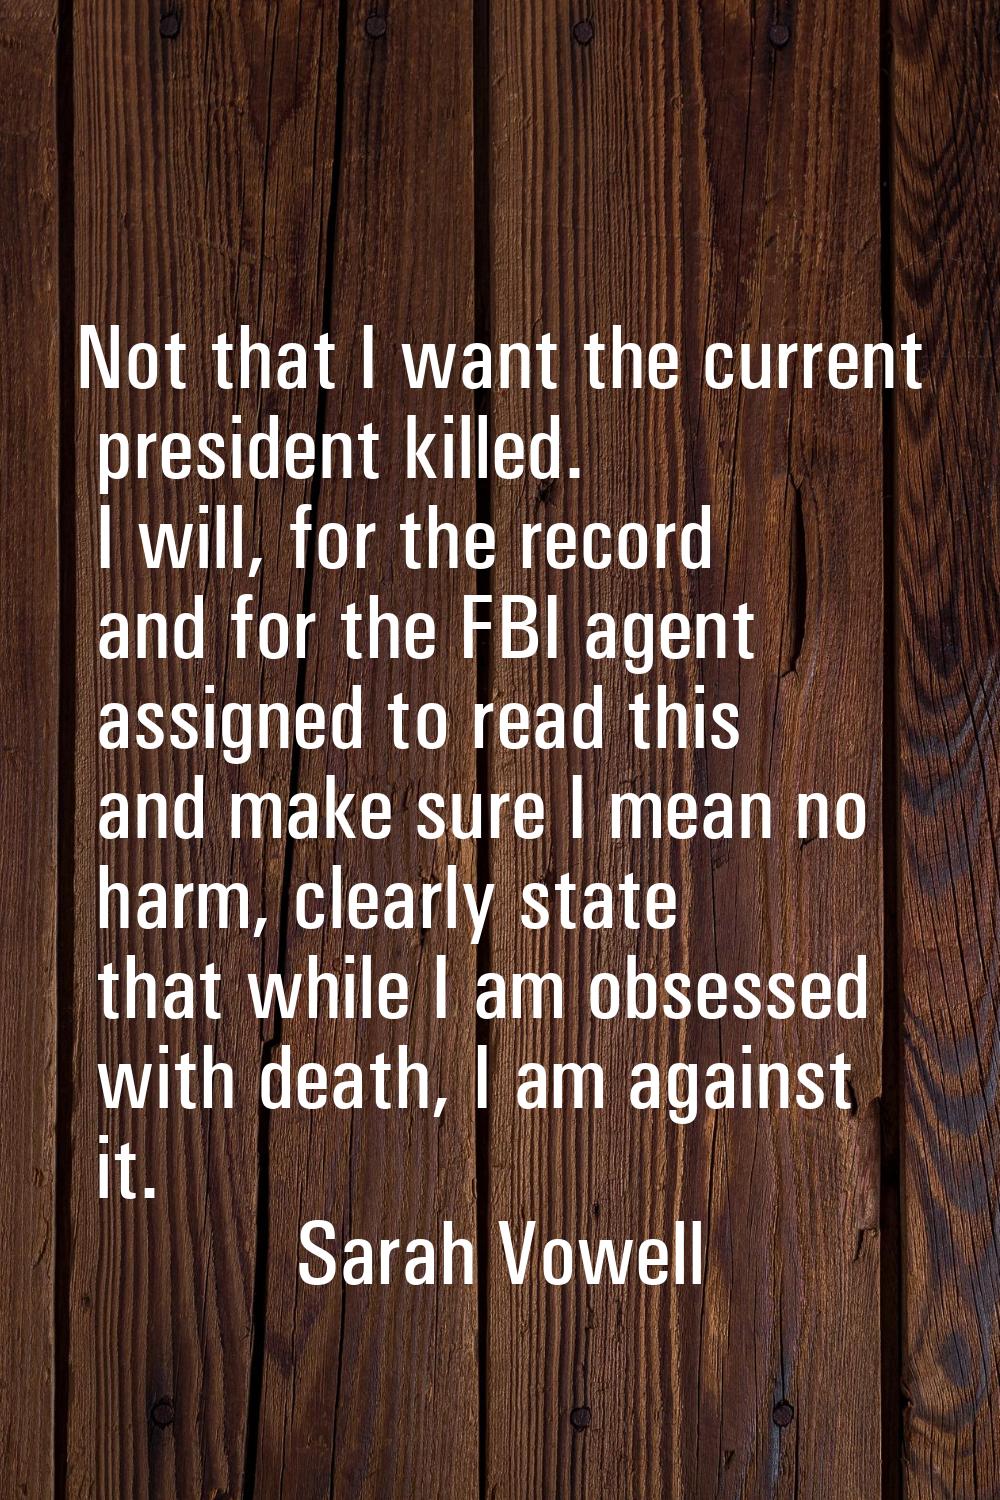 Not that I want the current president killed. I will, for the record and for the FBI agent assigned